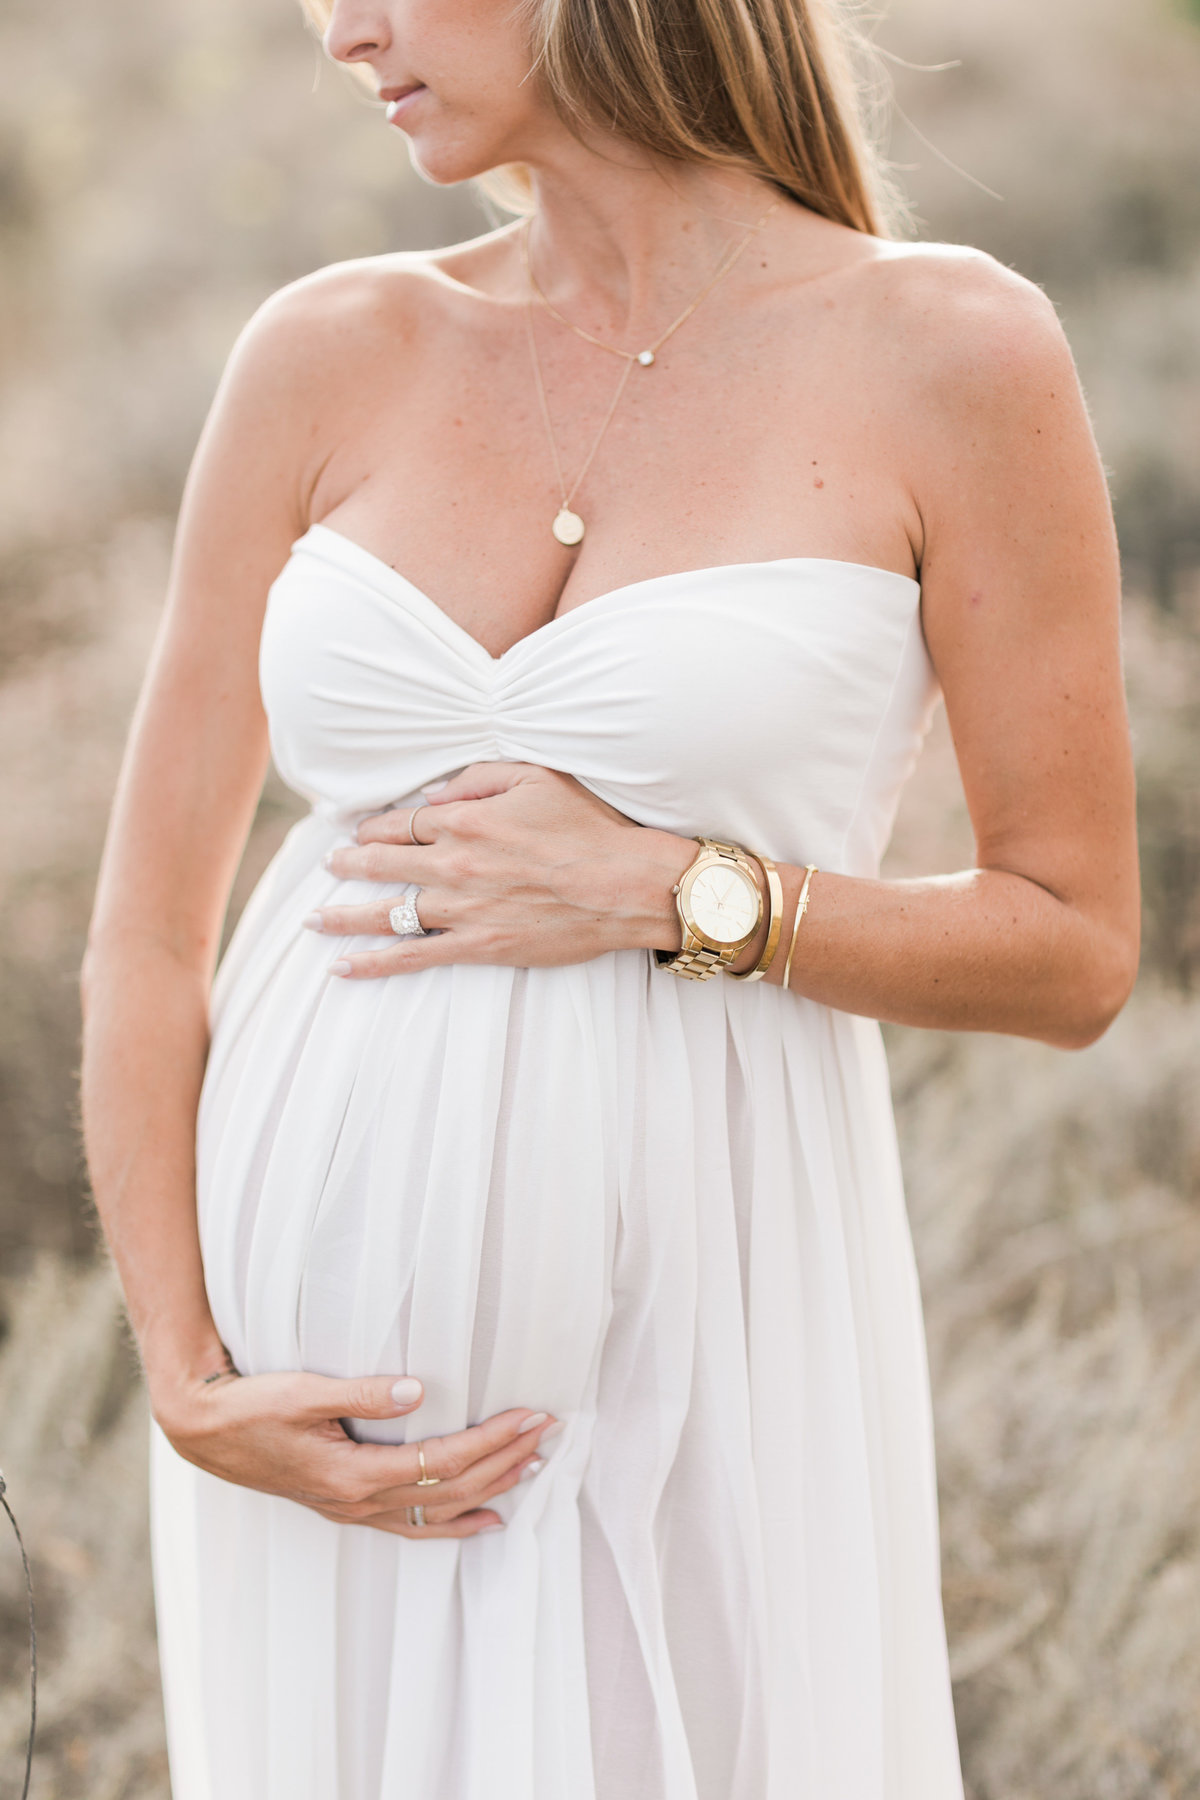 Southern California Coastline Maternity Session_Valorie Darling Photography-5820